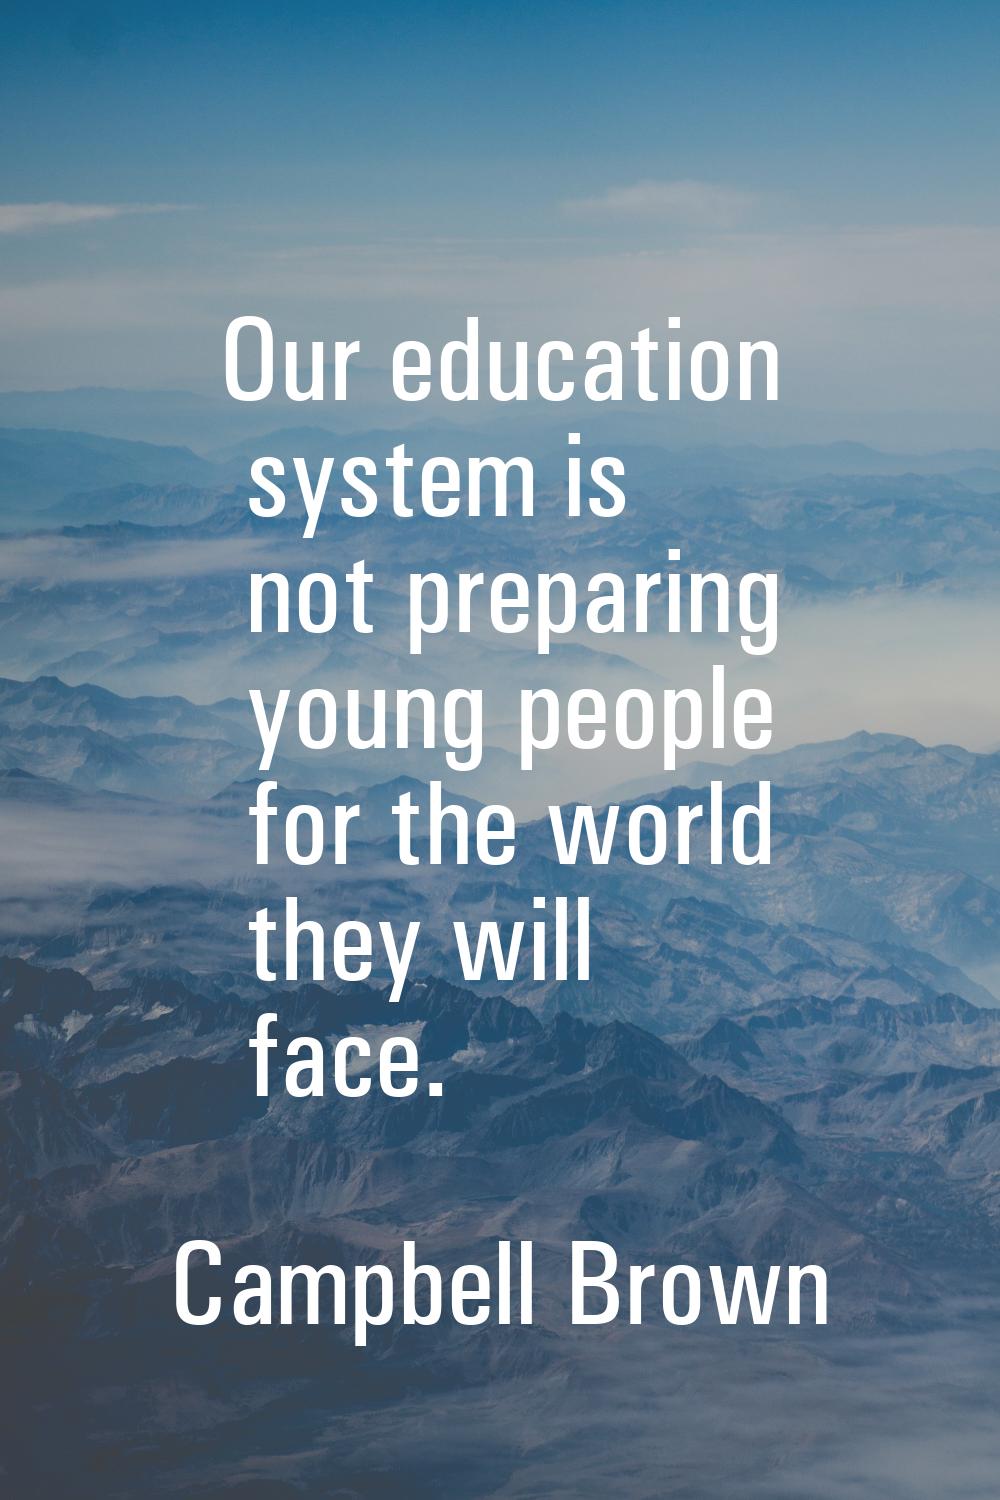 Our education system is not preparing young people for the world they will face.